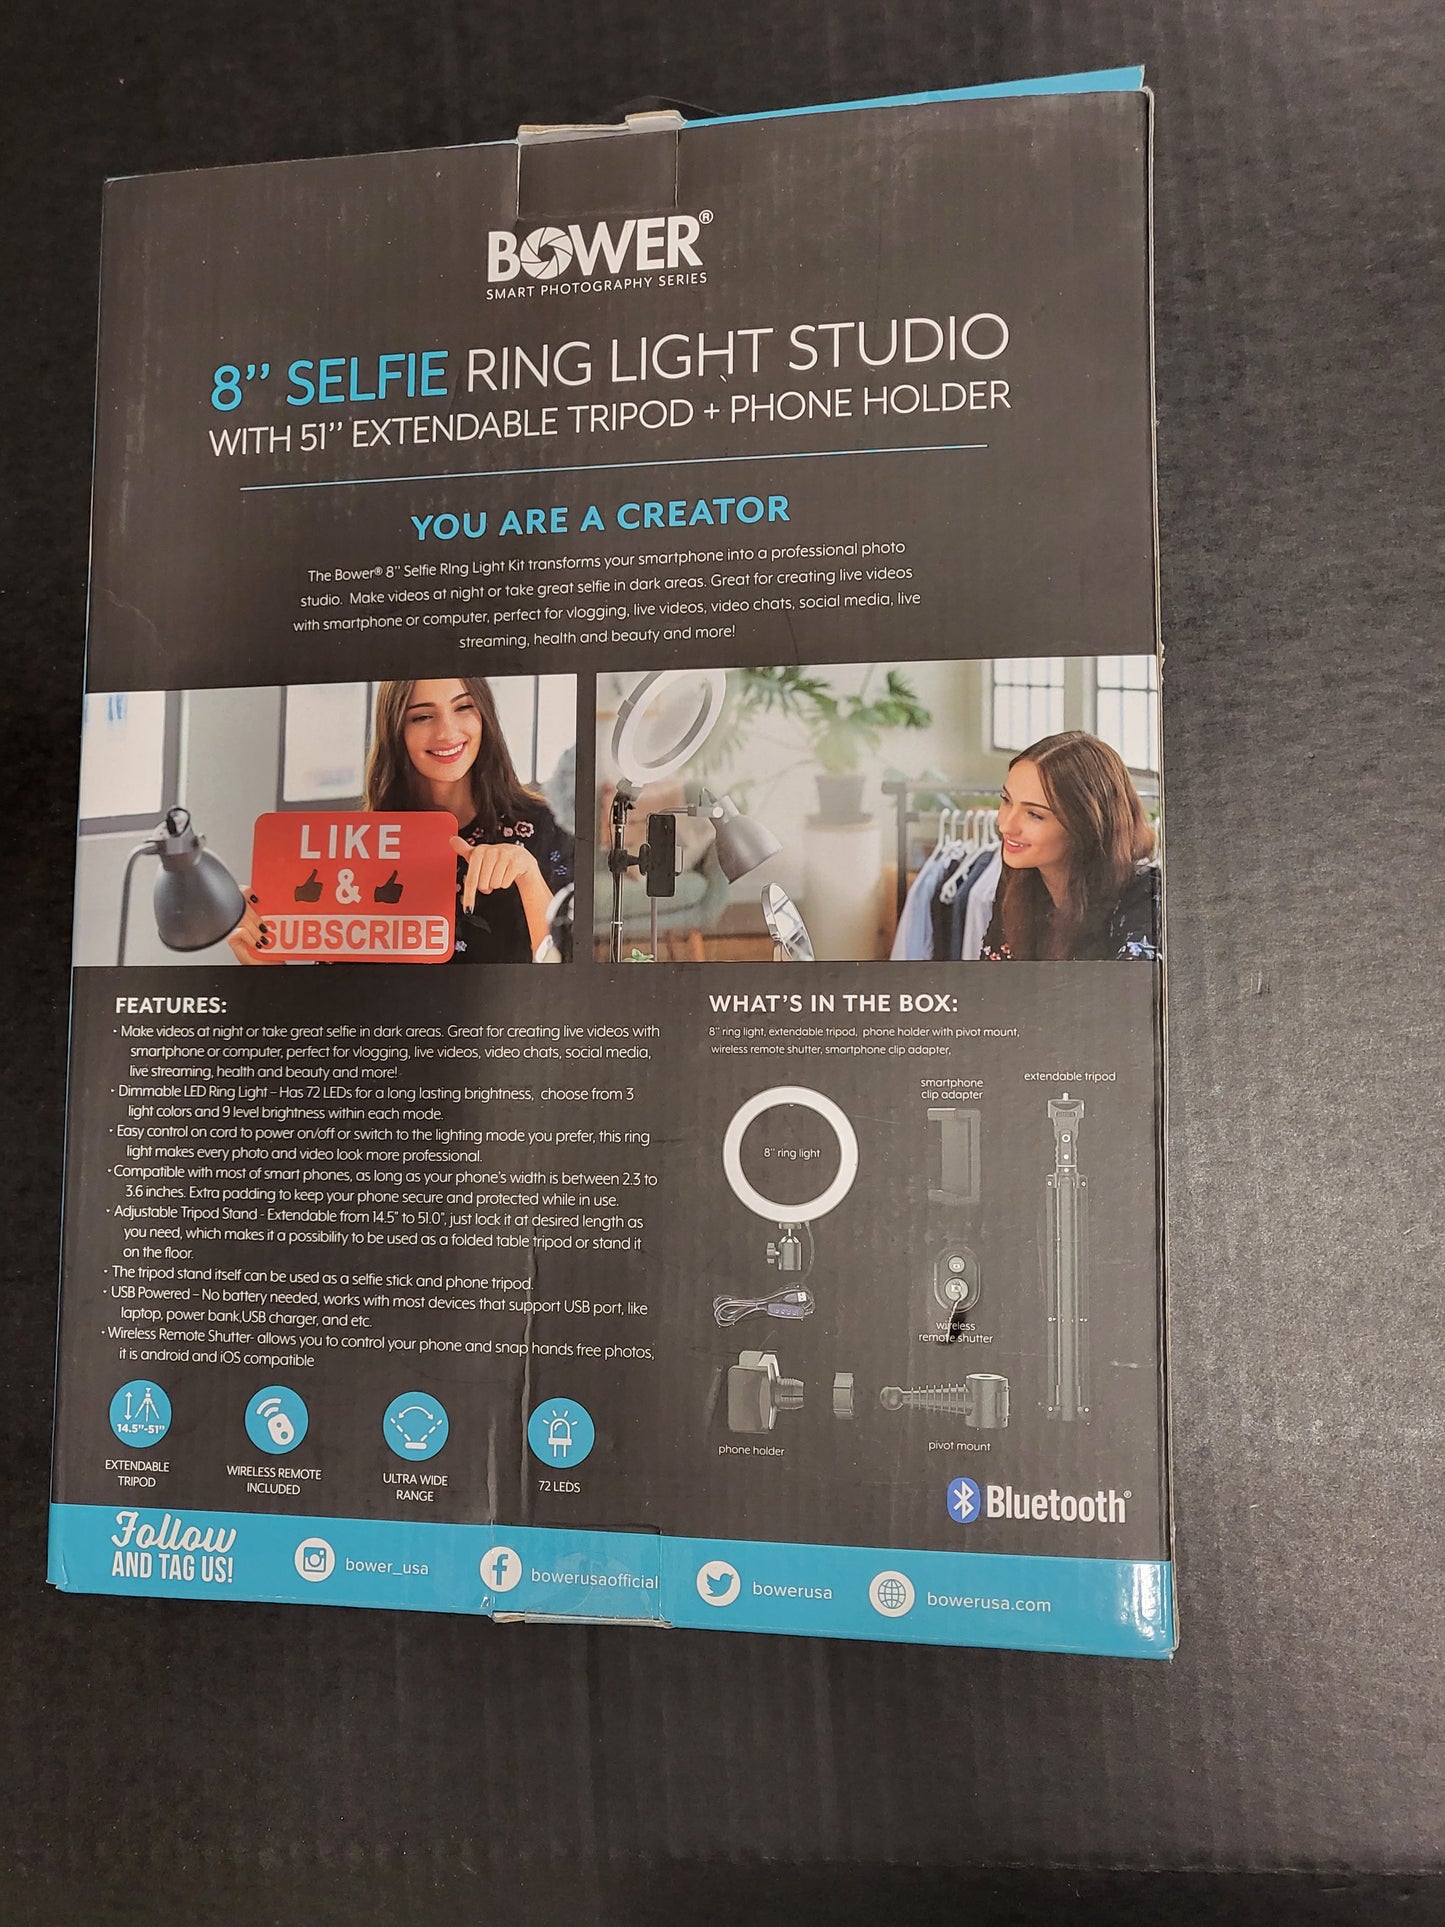 Bower 8in Selfie Ring Light Studio with 51in Extendable Tripod Phone Holder